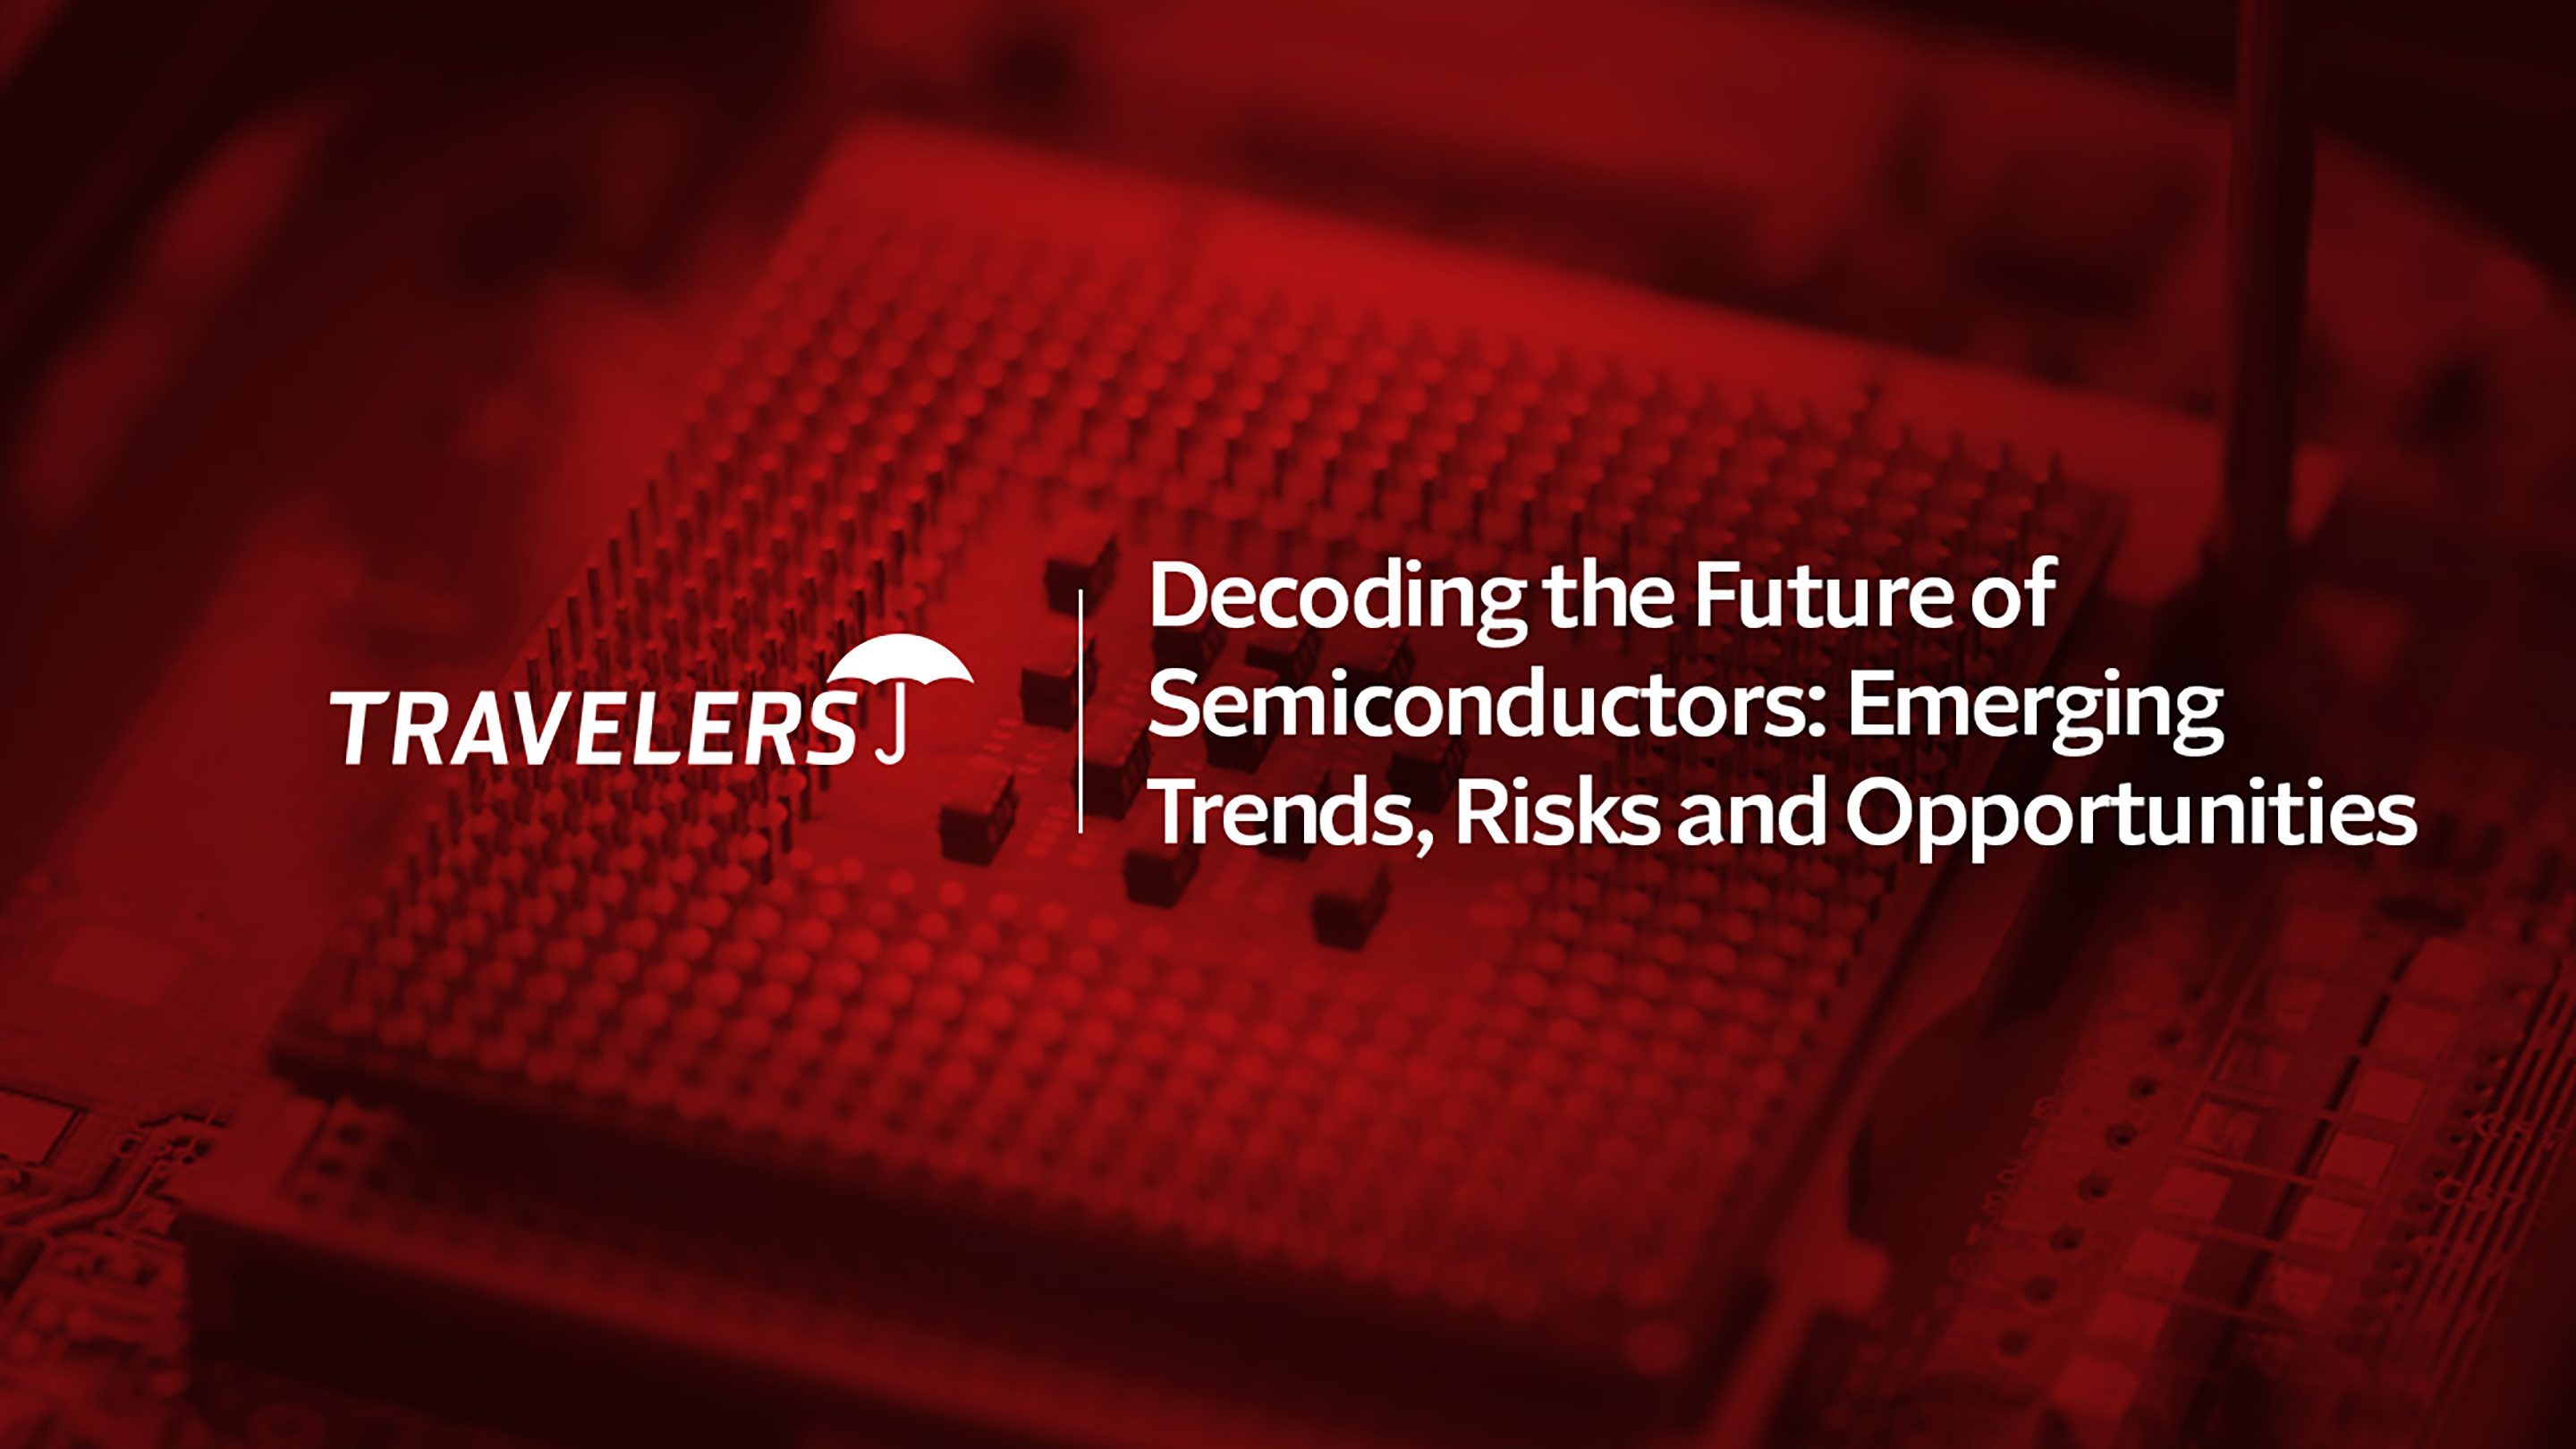 Red webinar background with the words "Decoding the Future of Semiconductors: Emerging Trends, Risks, and Opportunities" on it.